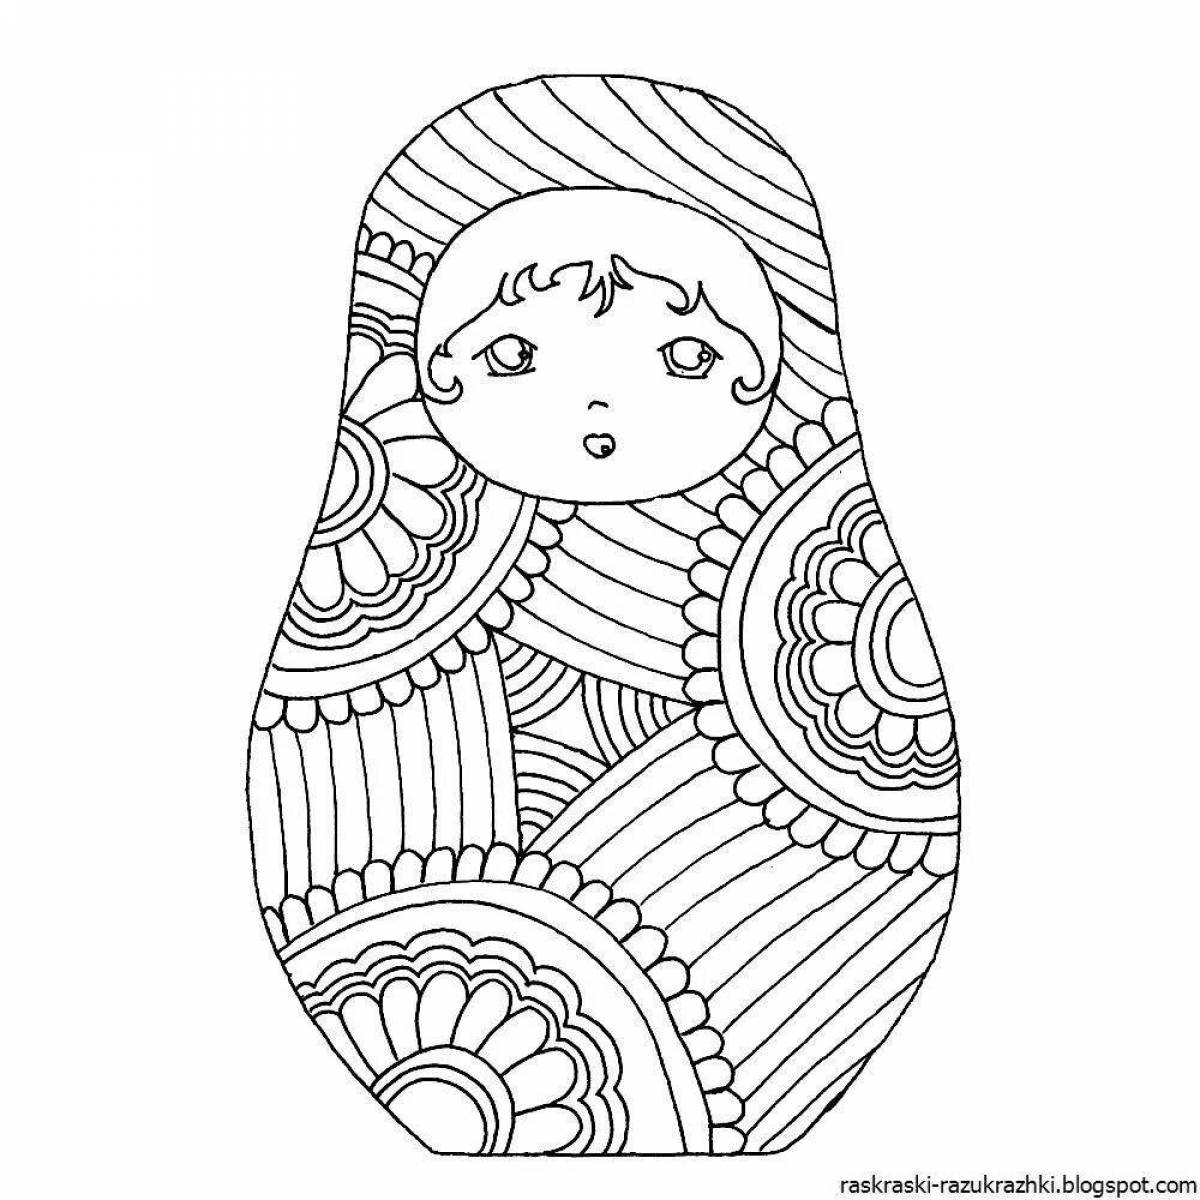 Coloring matryoshka for children 5-6 years old